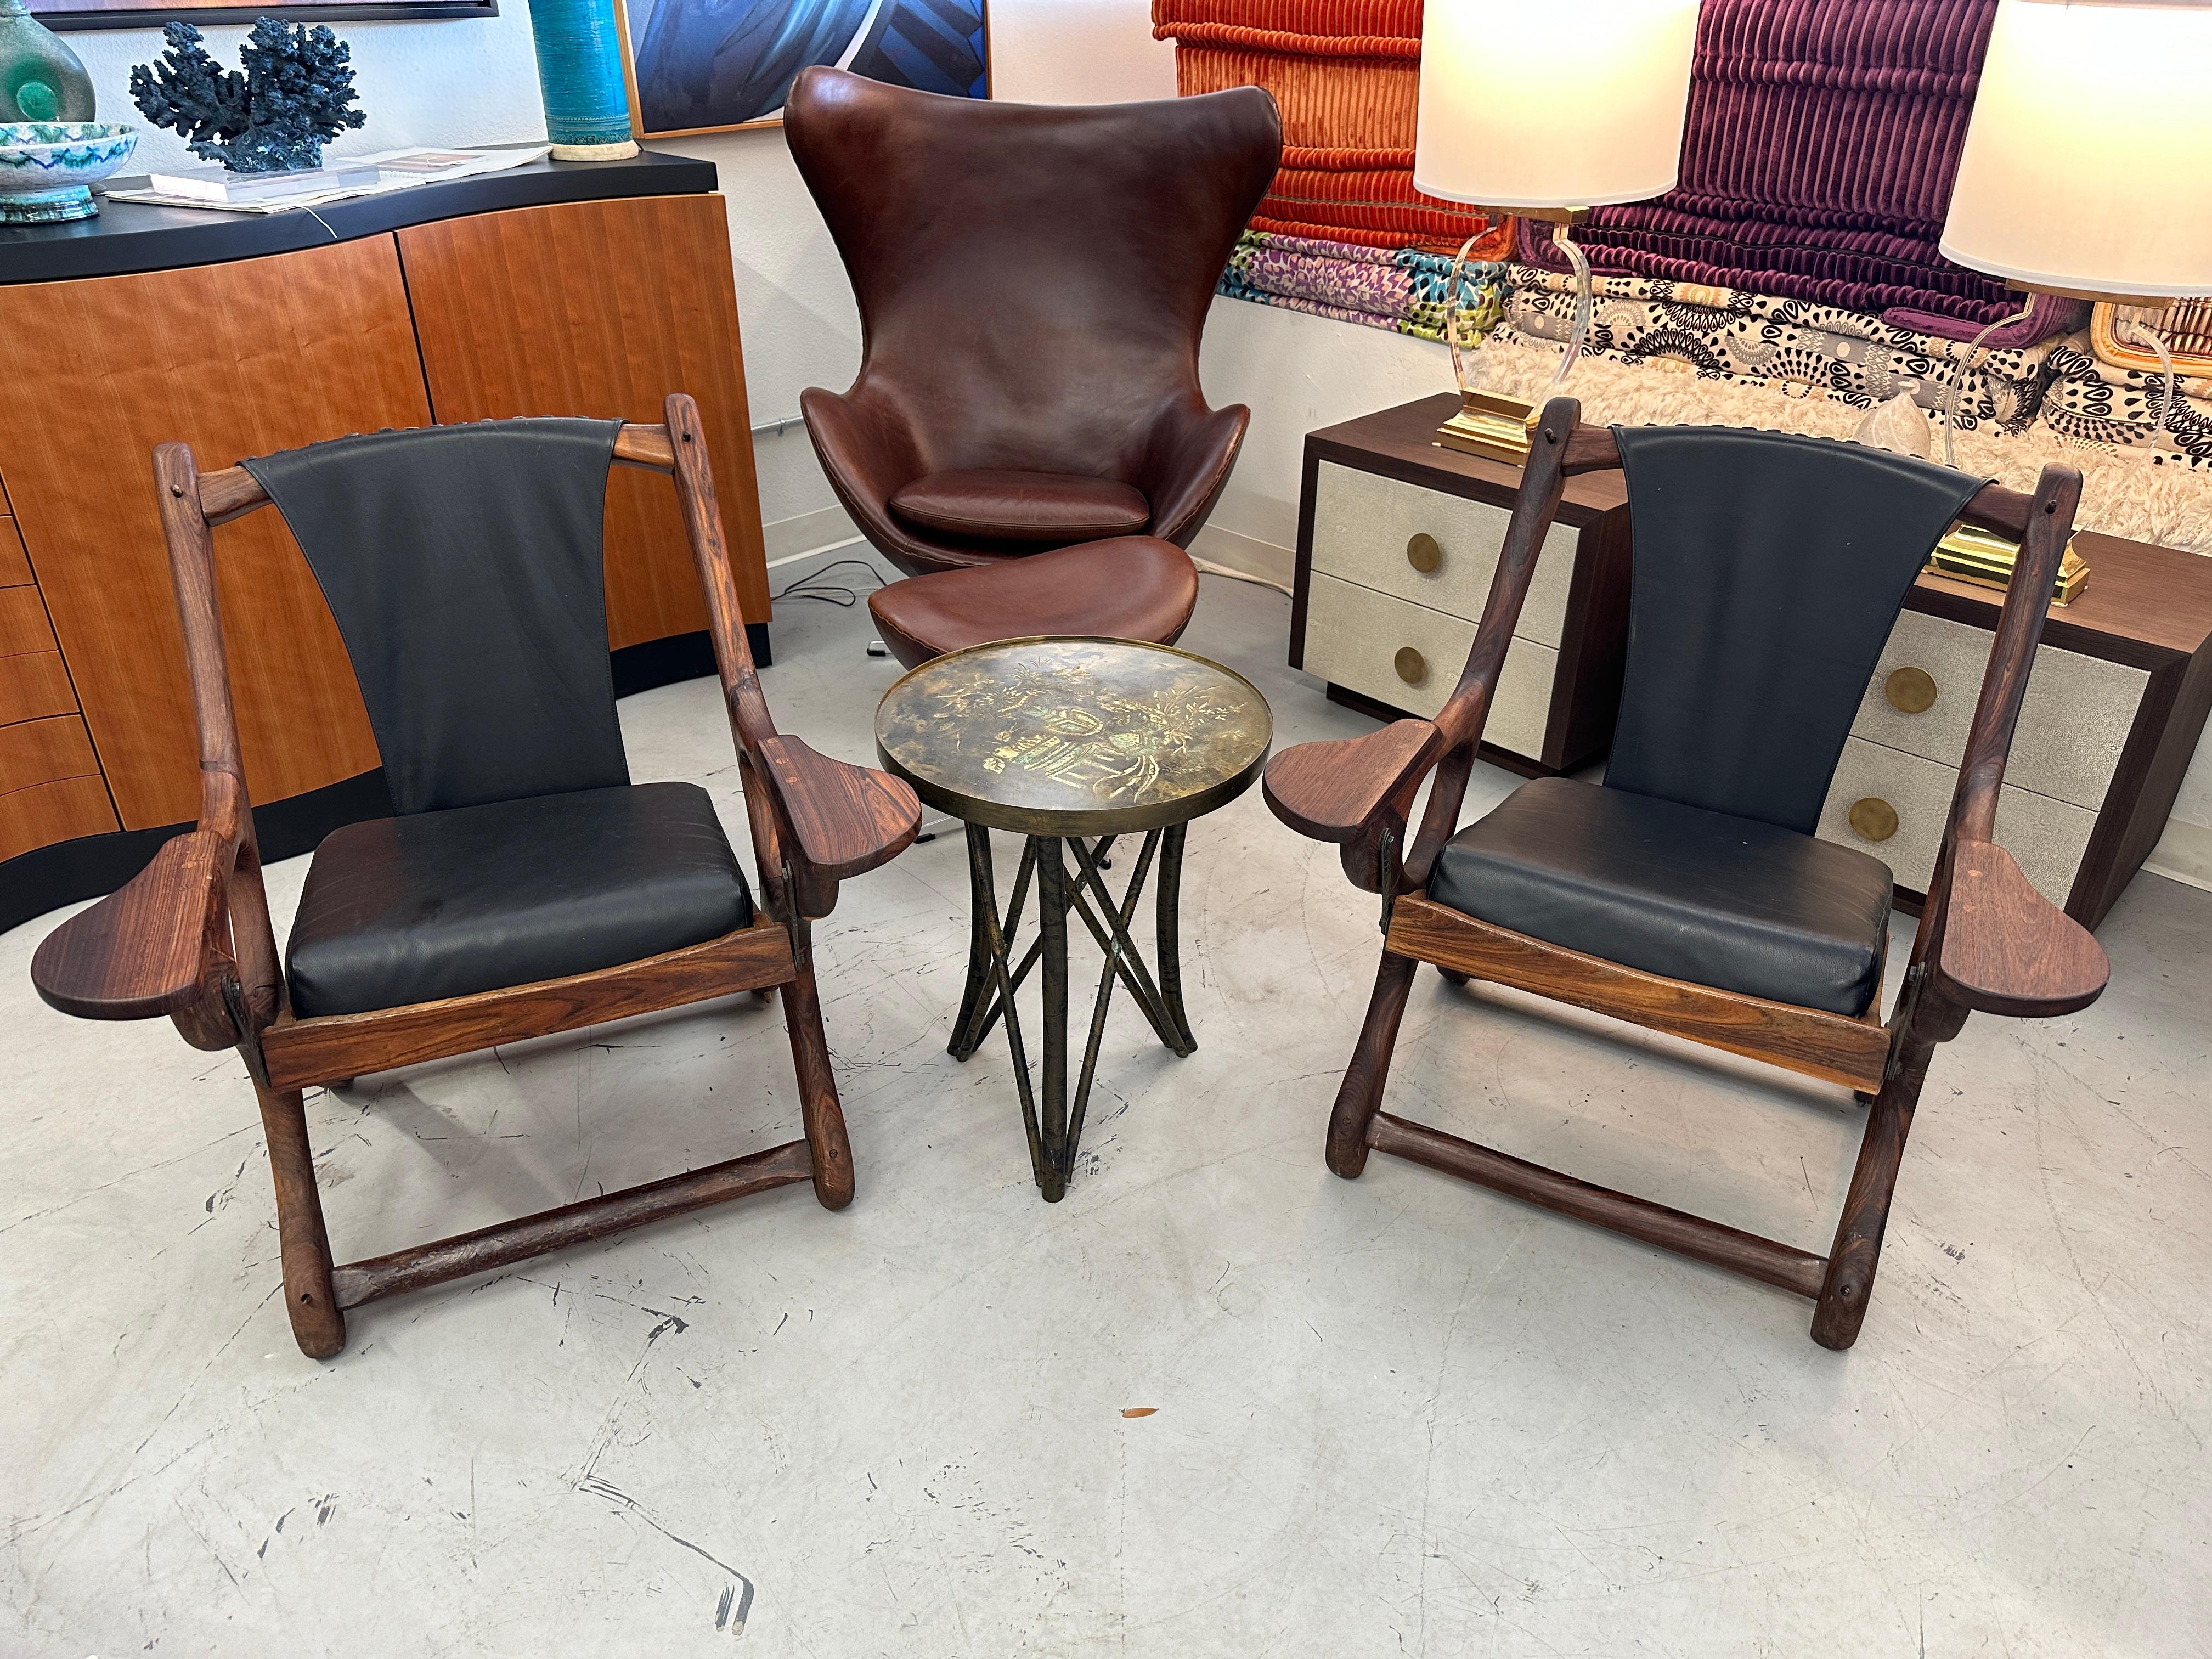 A quite lovely pair of Don Shoemaker sling chairs for his firm Senal from the 1960's. This pair is made of a Mexican Rosewood, Cocobolo I believe. The pair has beautiful graining and the leather sling and seat cushion are in good condition. One of